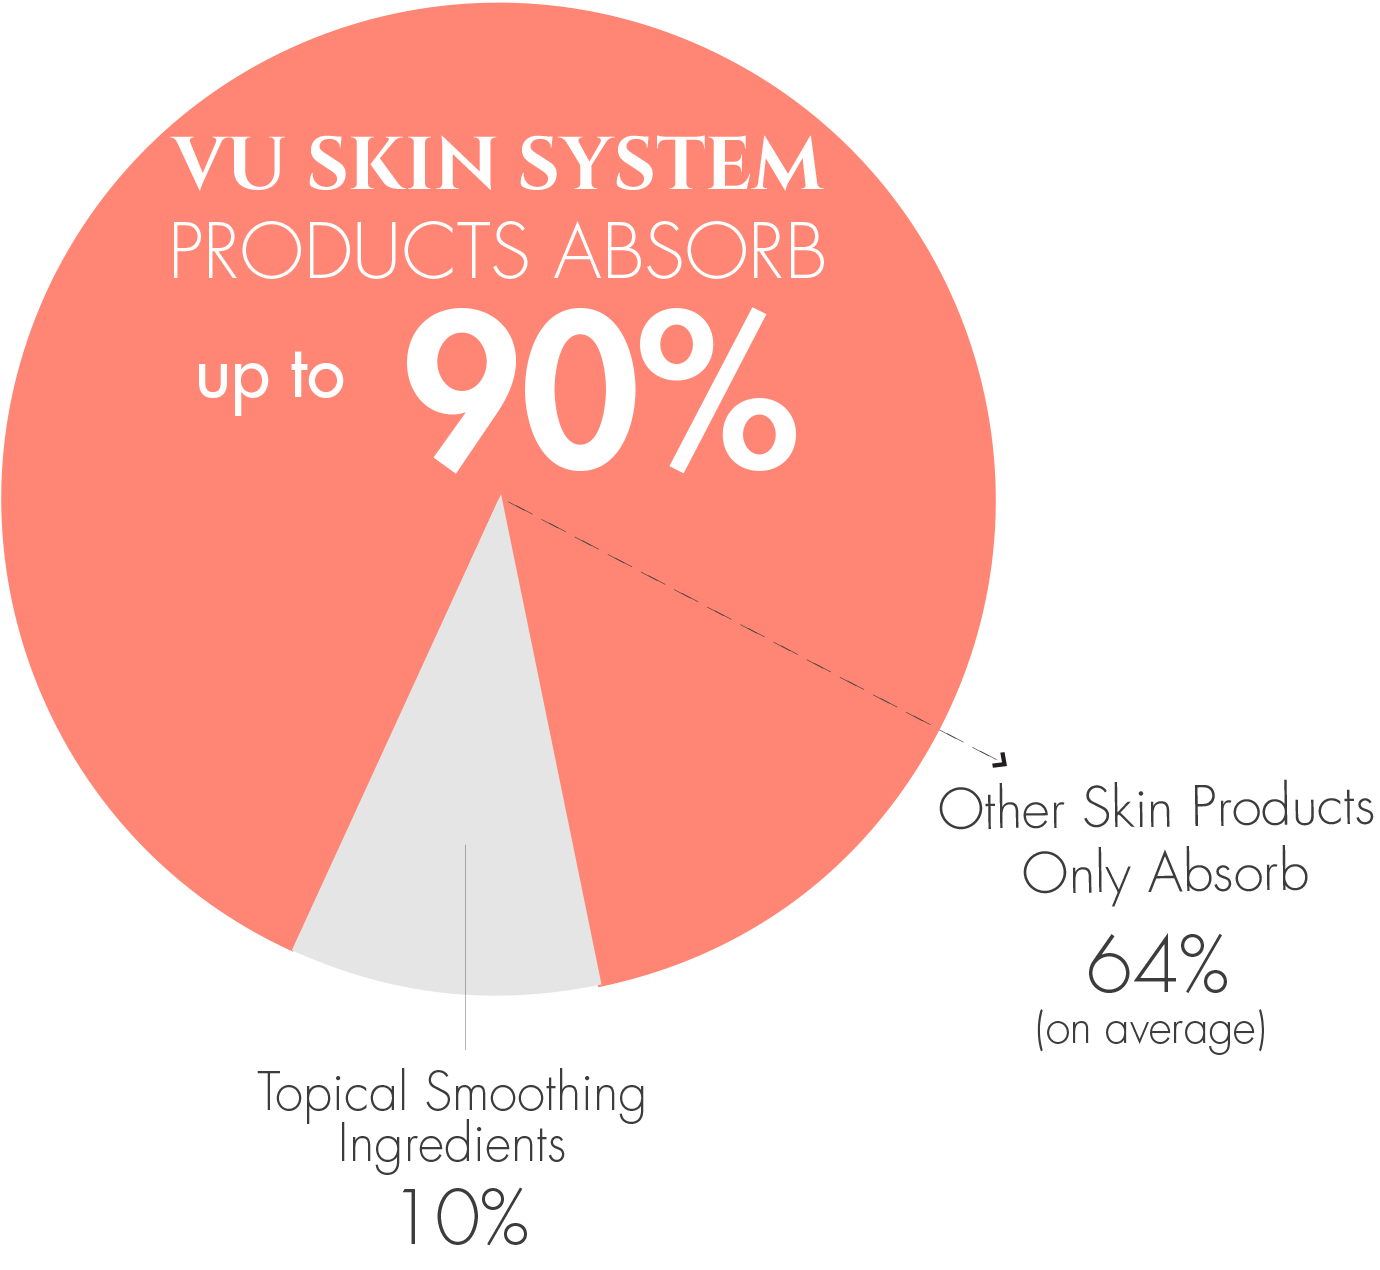 VU Skin System Products Absorb up to 90% of active ingredients